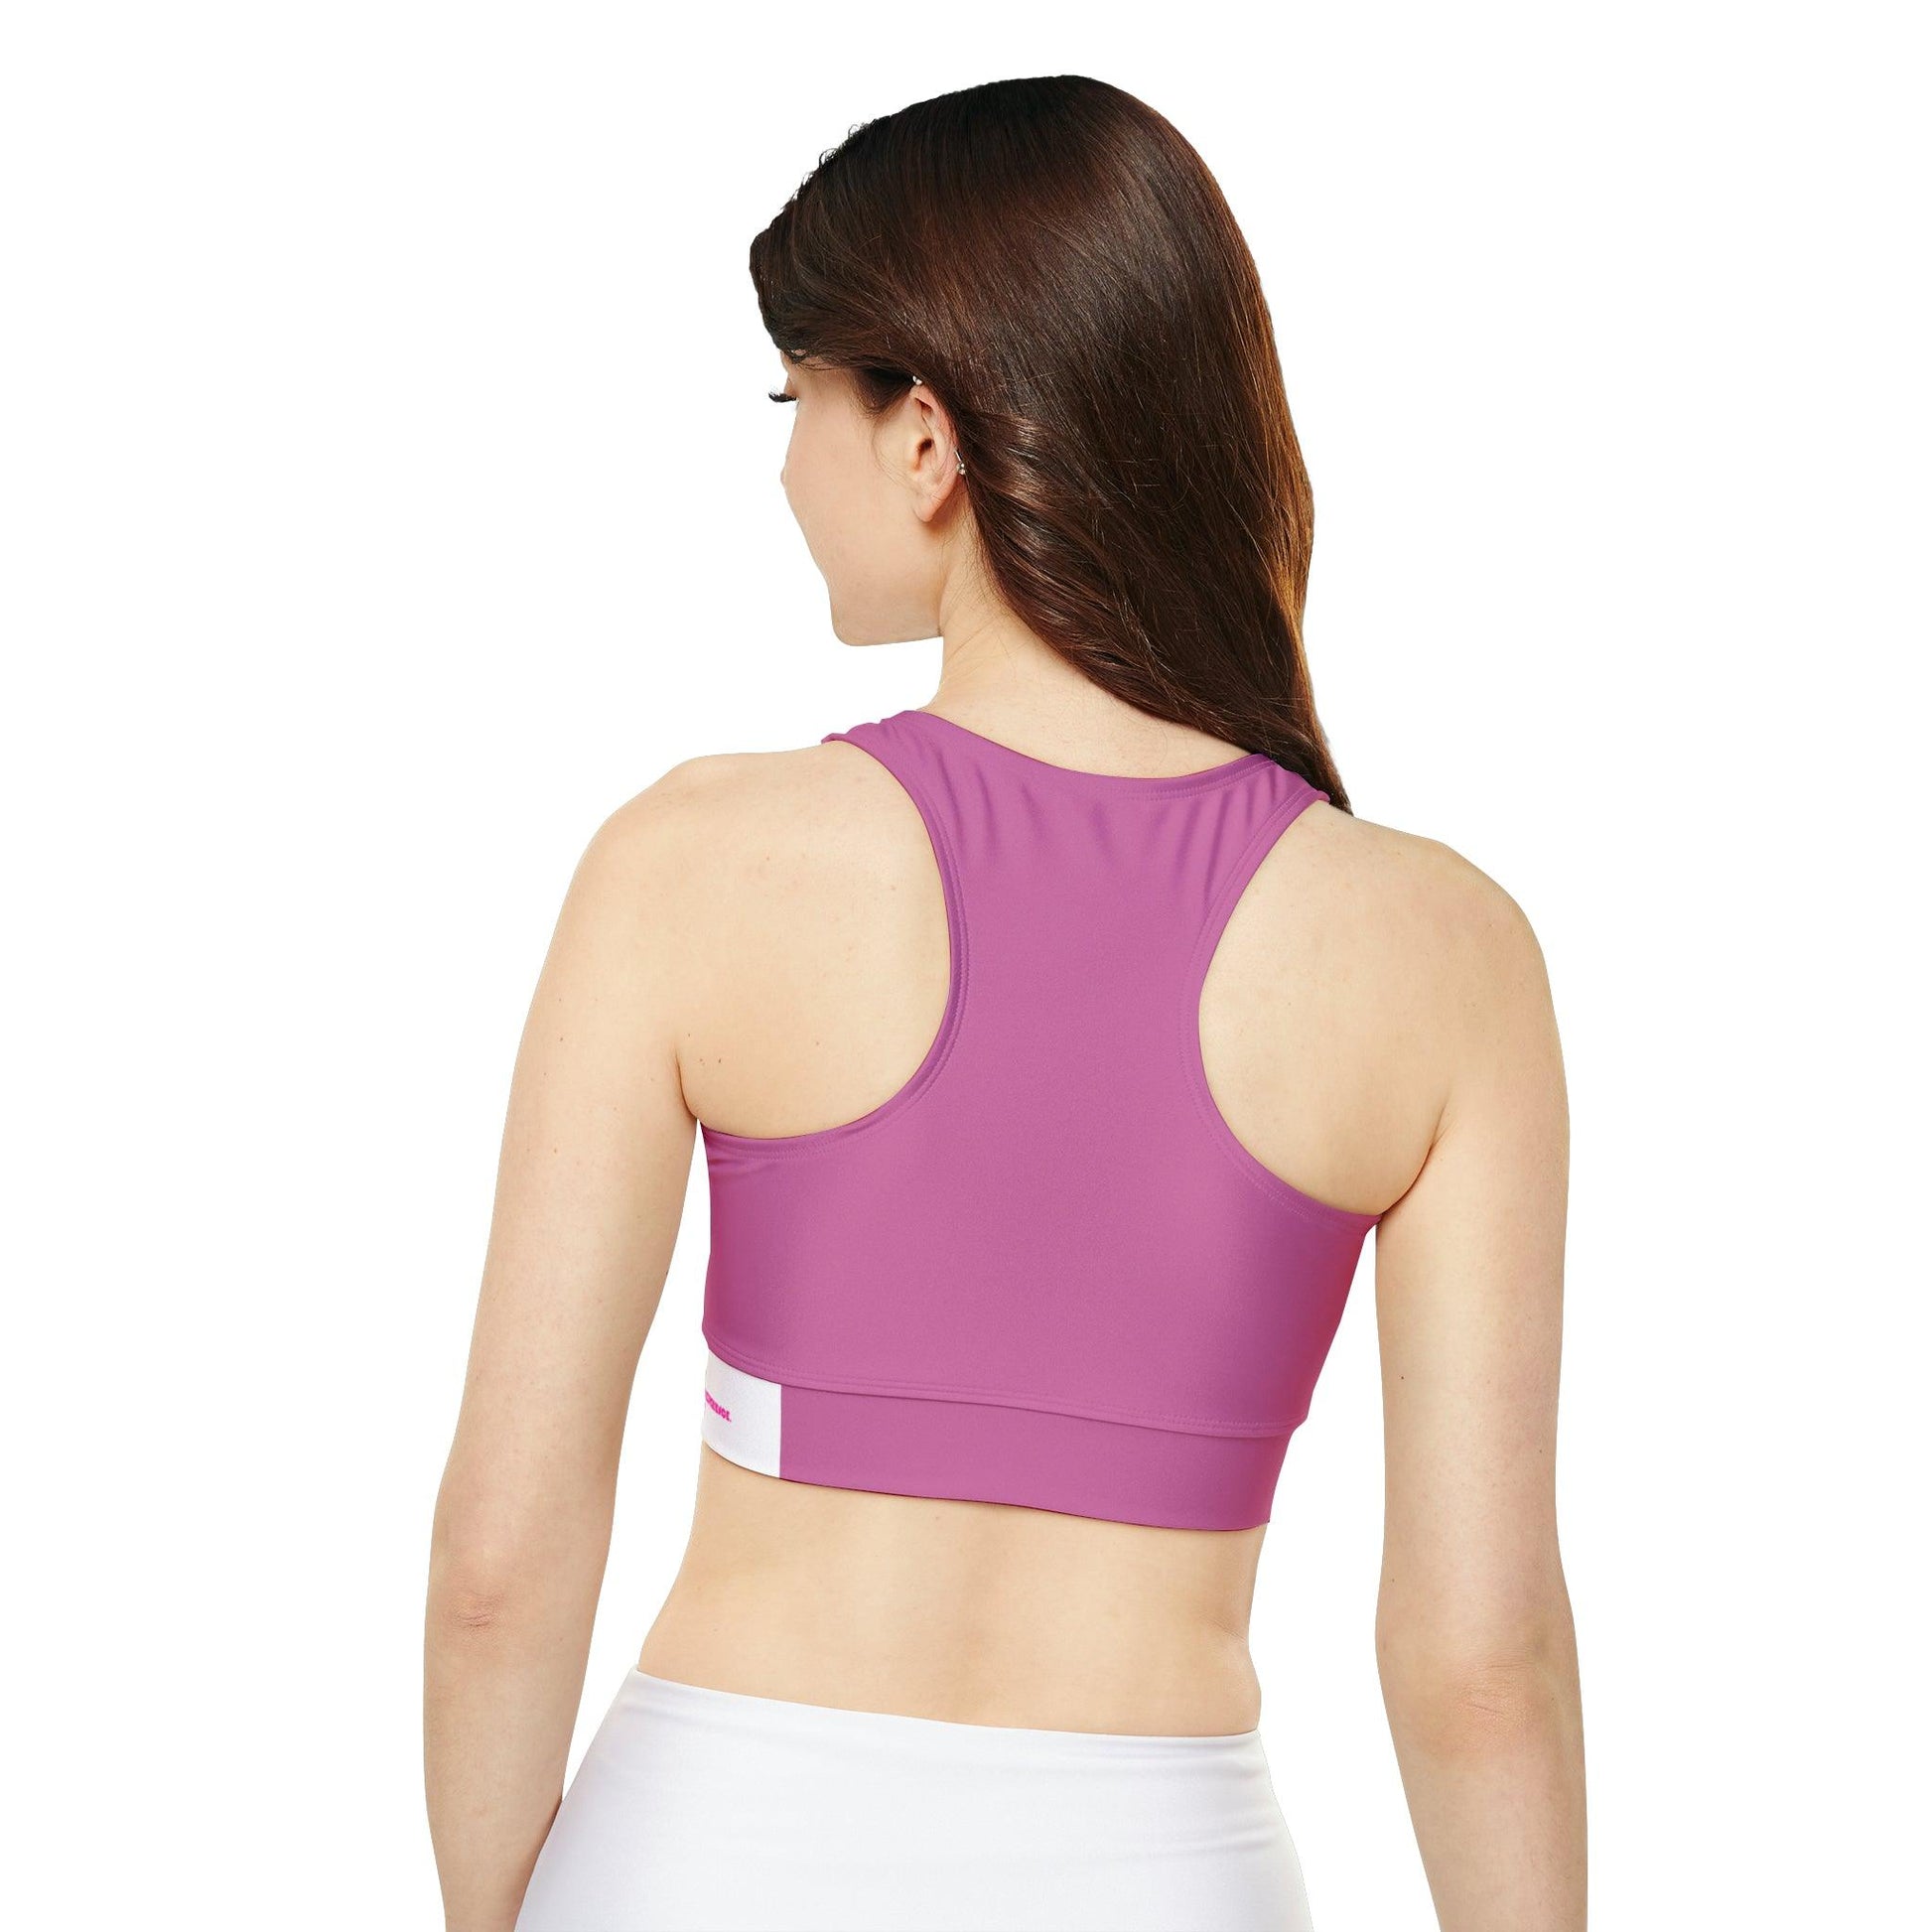 Lifestyle Fully Lined, Pink Padded Sports Bra - COFFEEBRE